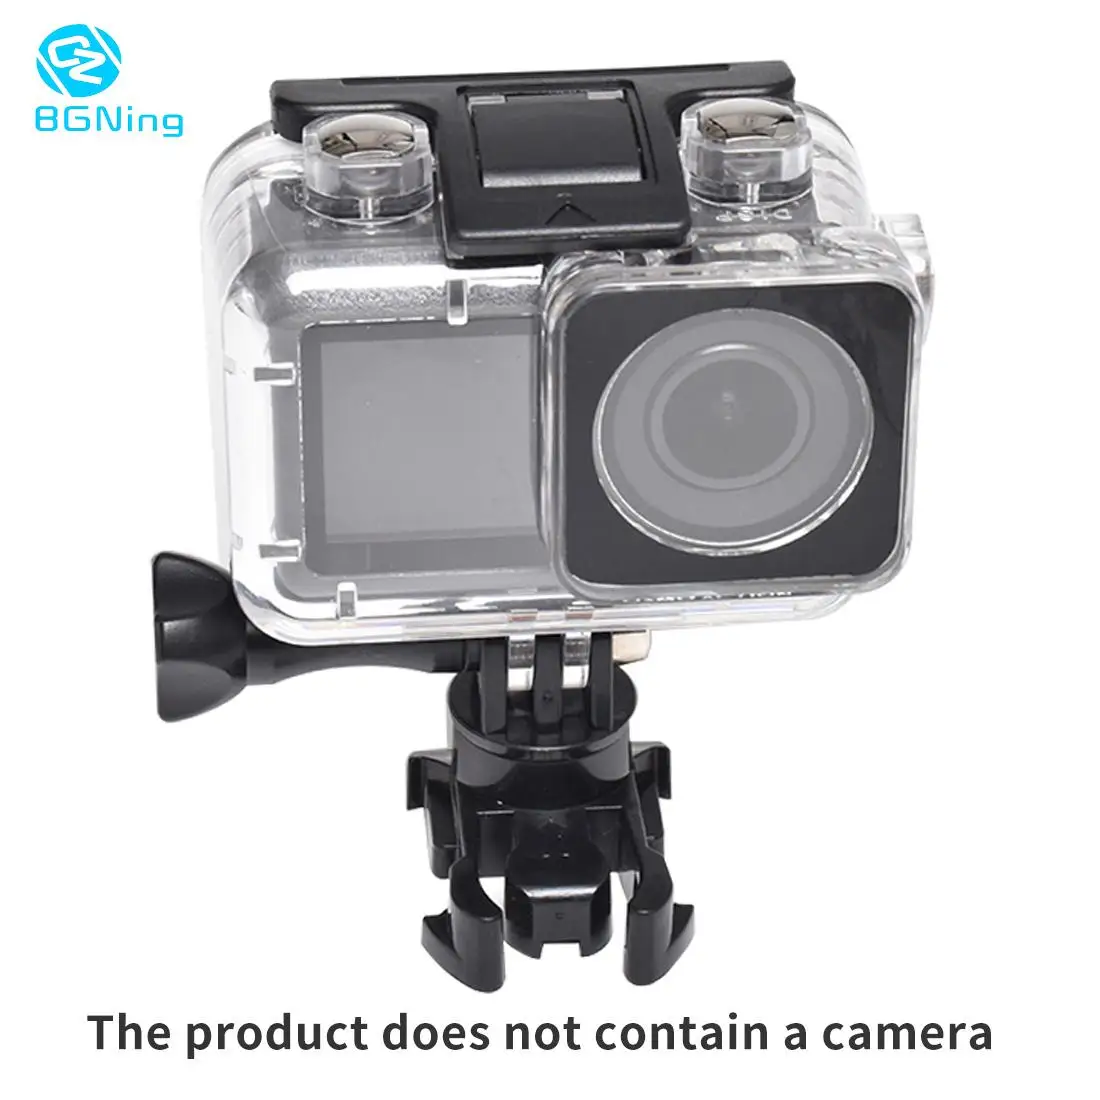 

60m Underwater Diving Waterproof Case Protective Housing Shell for DJI Osmo Action Camera 2 Protector Cover Accessories